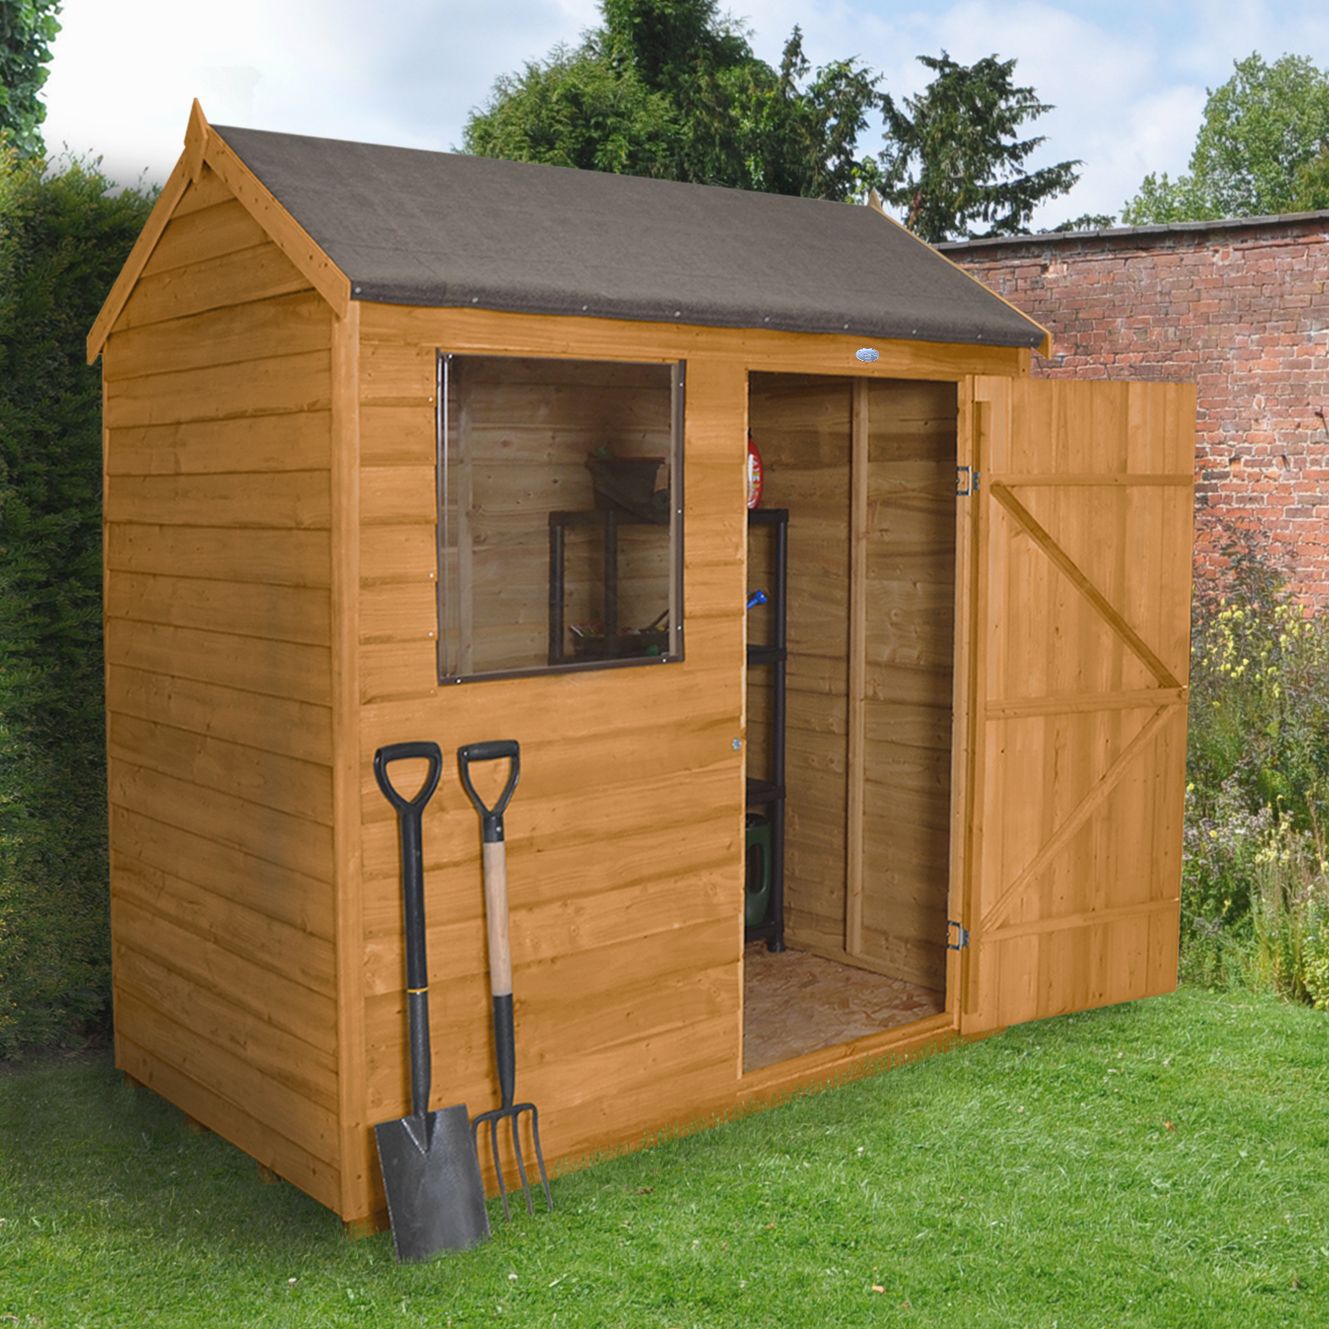 6x4 shed, offers & deals, who has the best right now?